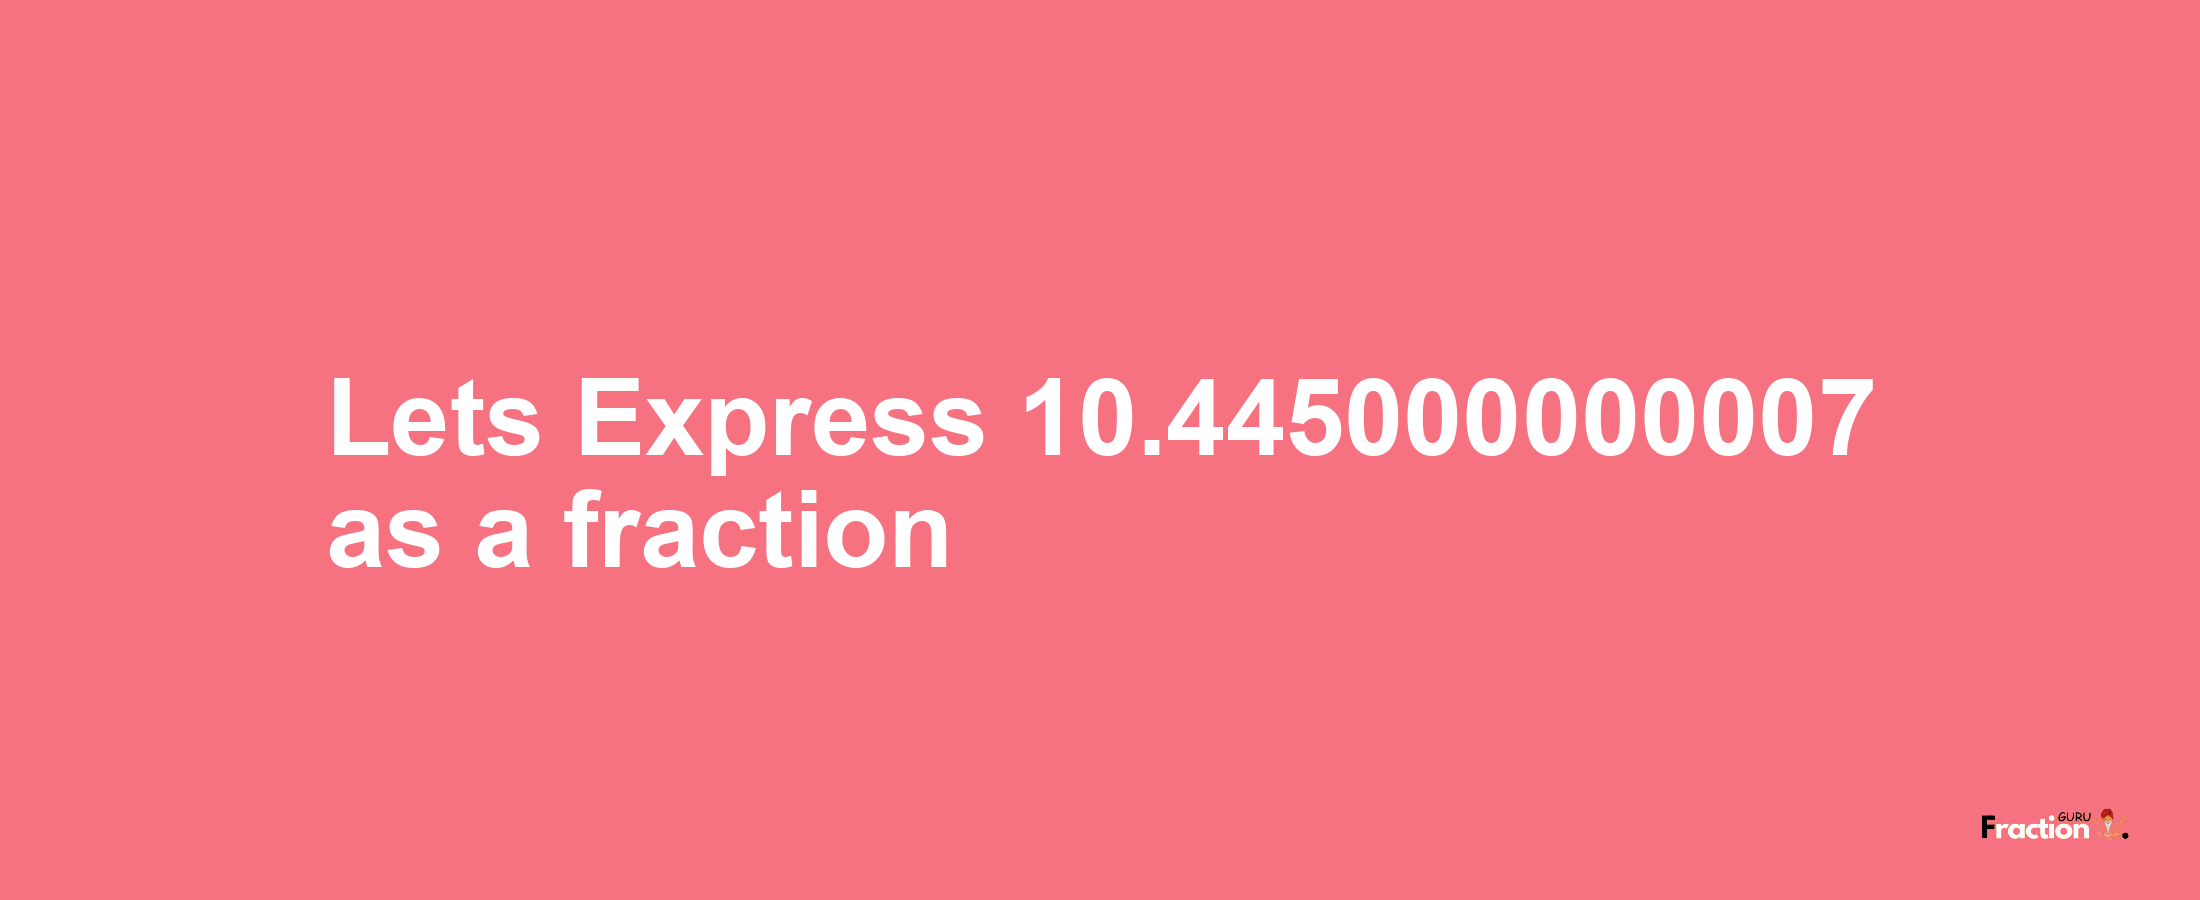 Lets Express 10.445000000007 as afraction